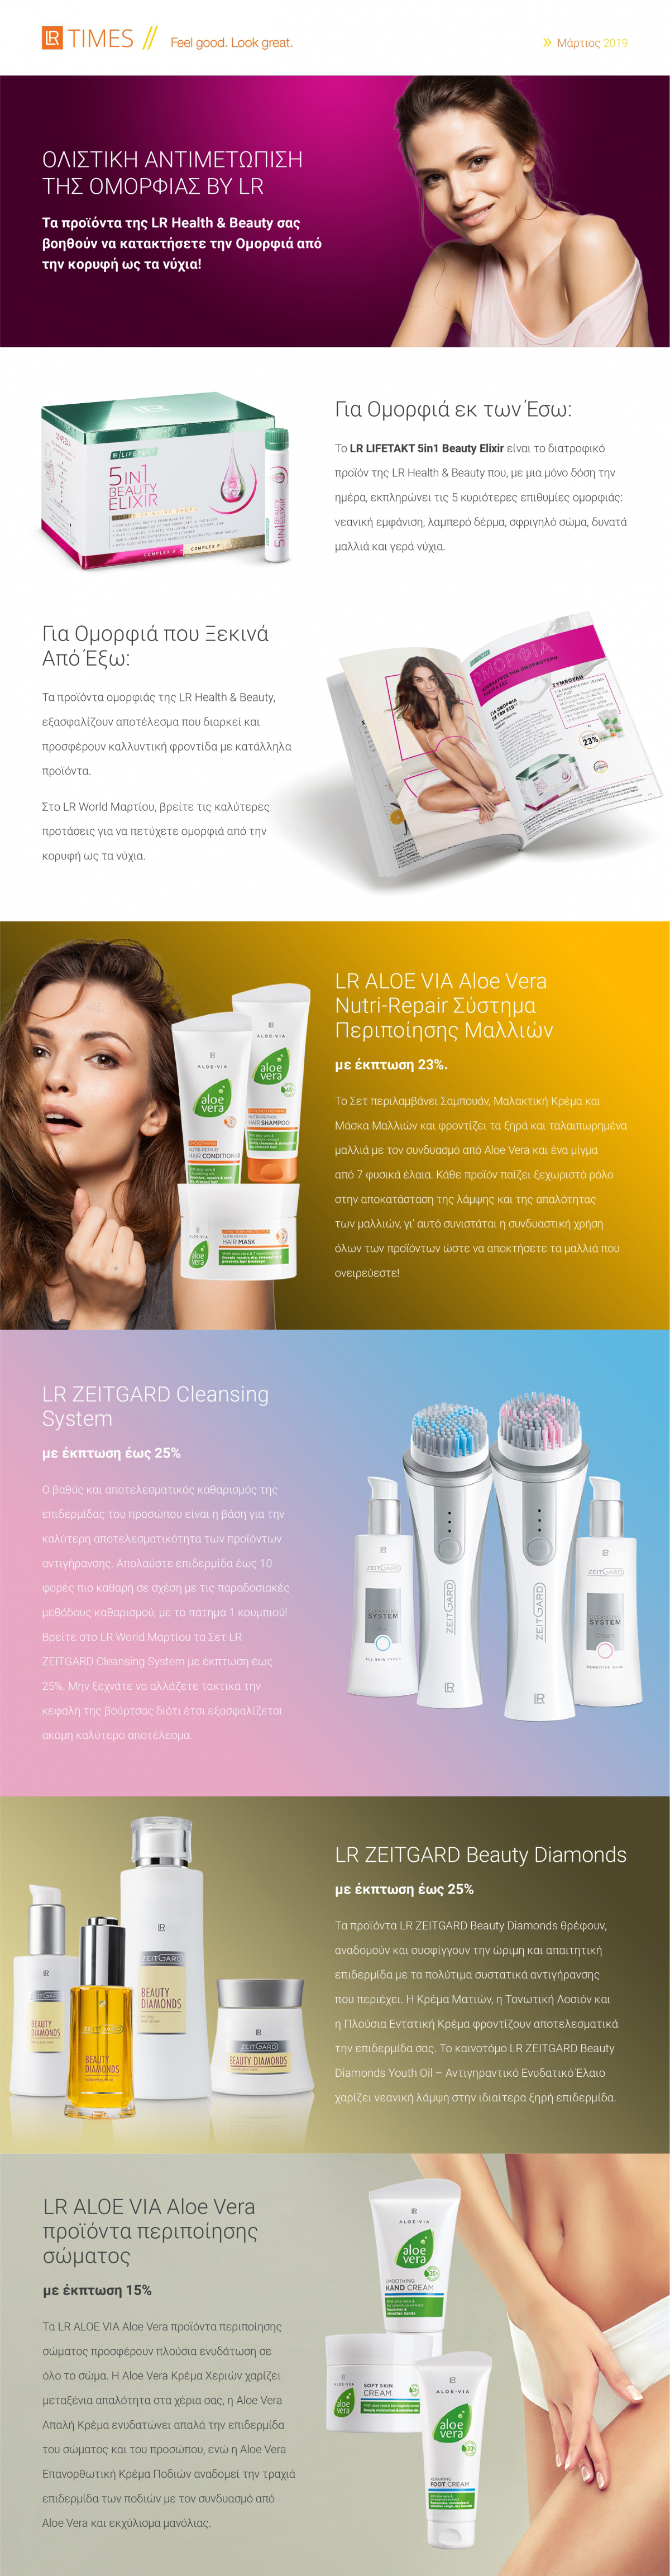 LR NL 2019 03 07 Beauty Products